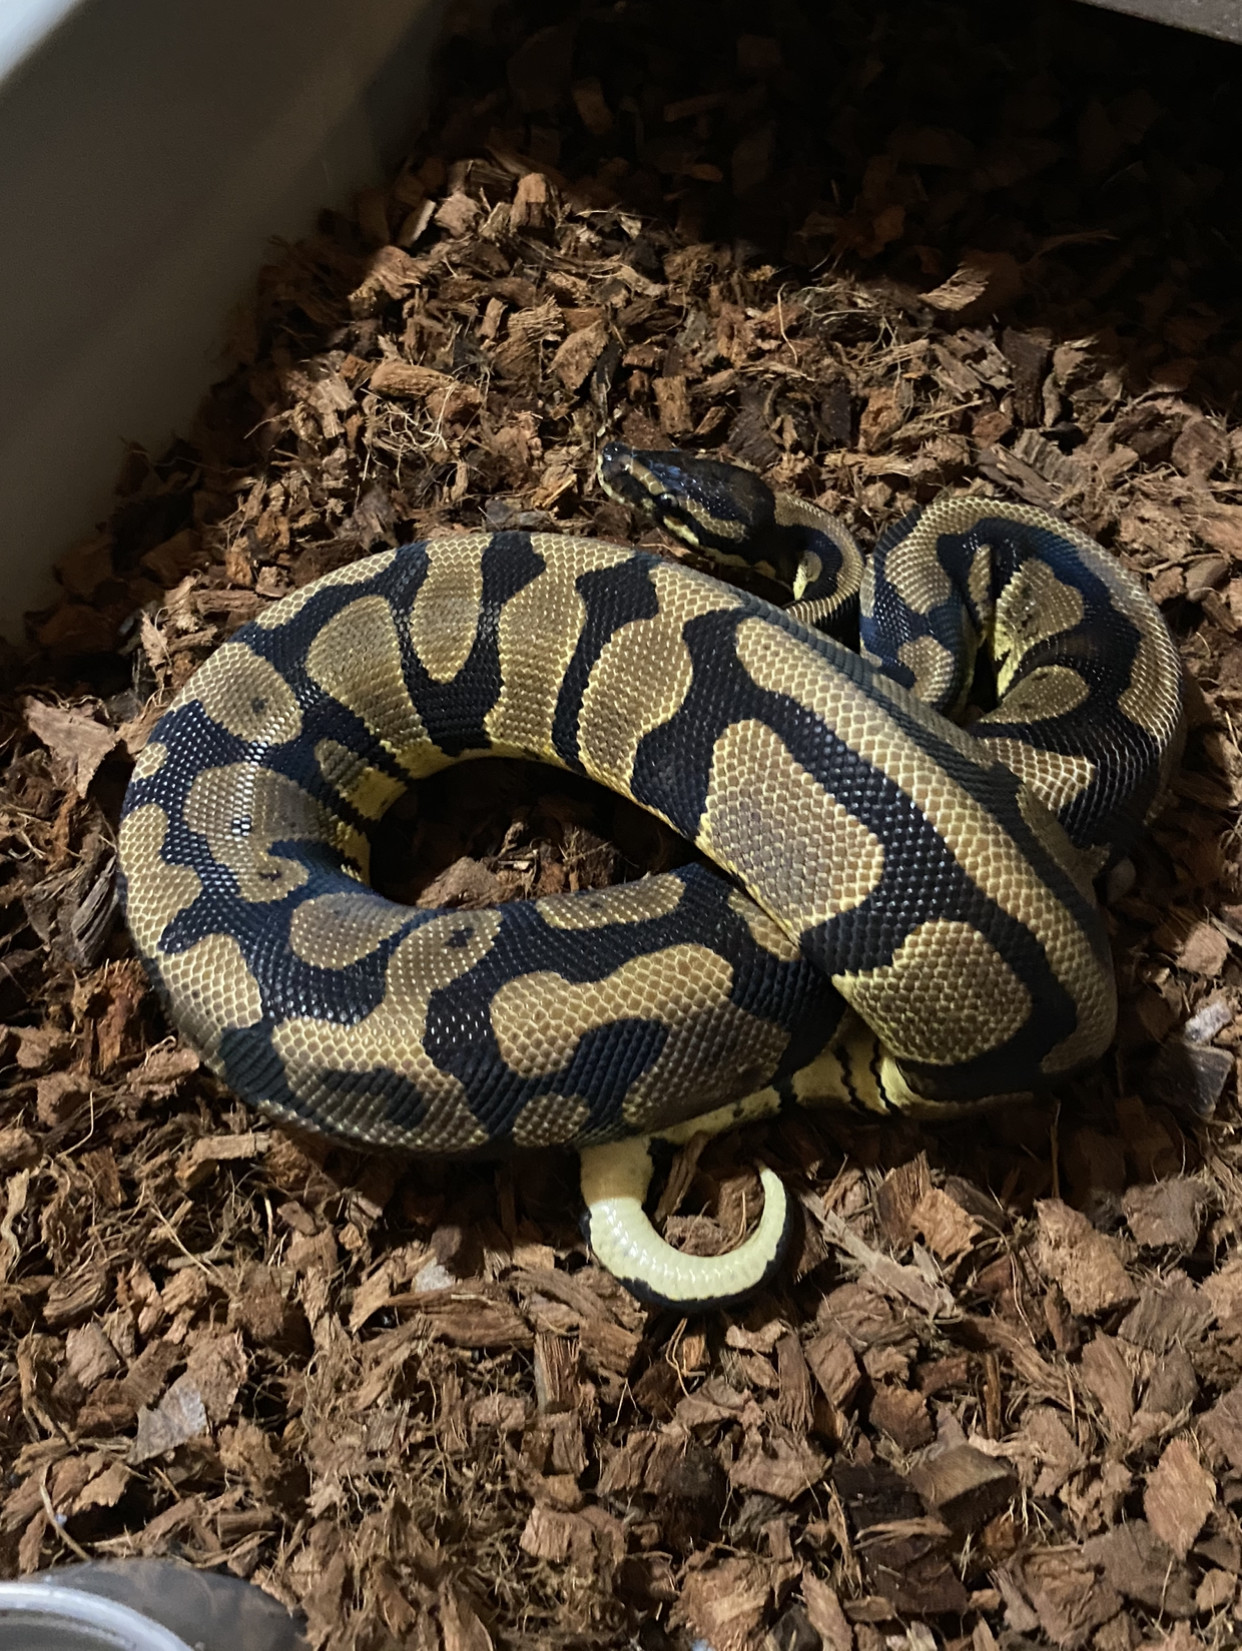 Confusion Ball Python by Cassella Constrictors